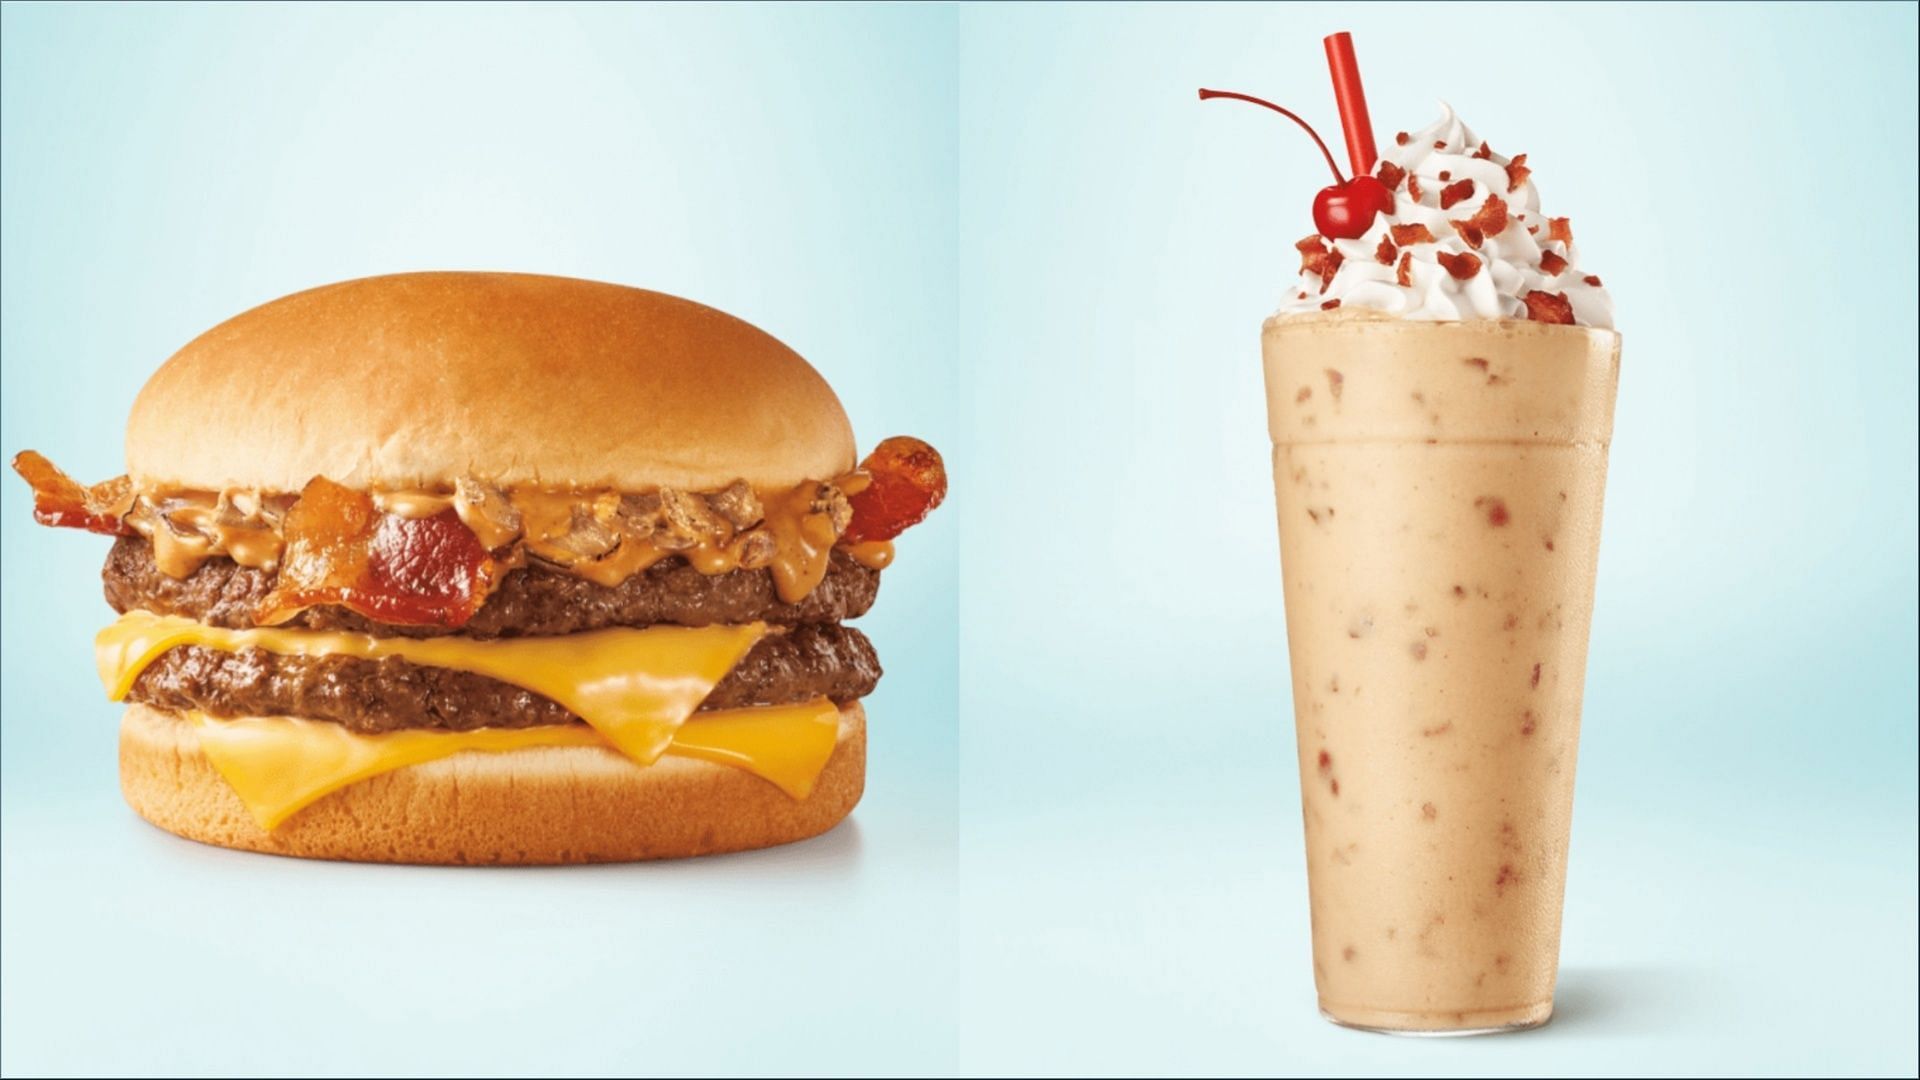 The peanut butter and bacon-infused shake and cheeseburger start at over $3.99 and $6.39, respectively (Image via Inspire Brands)